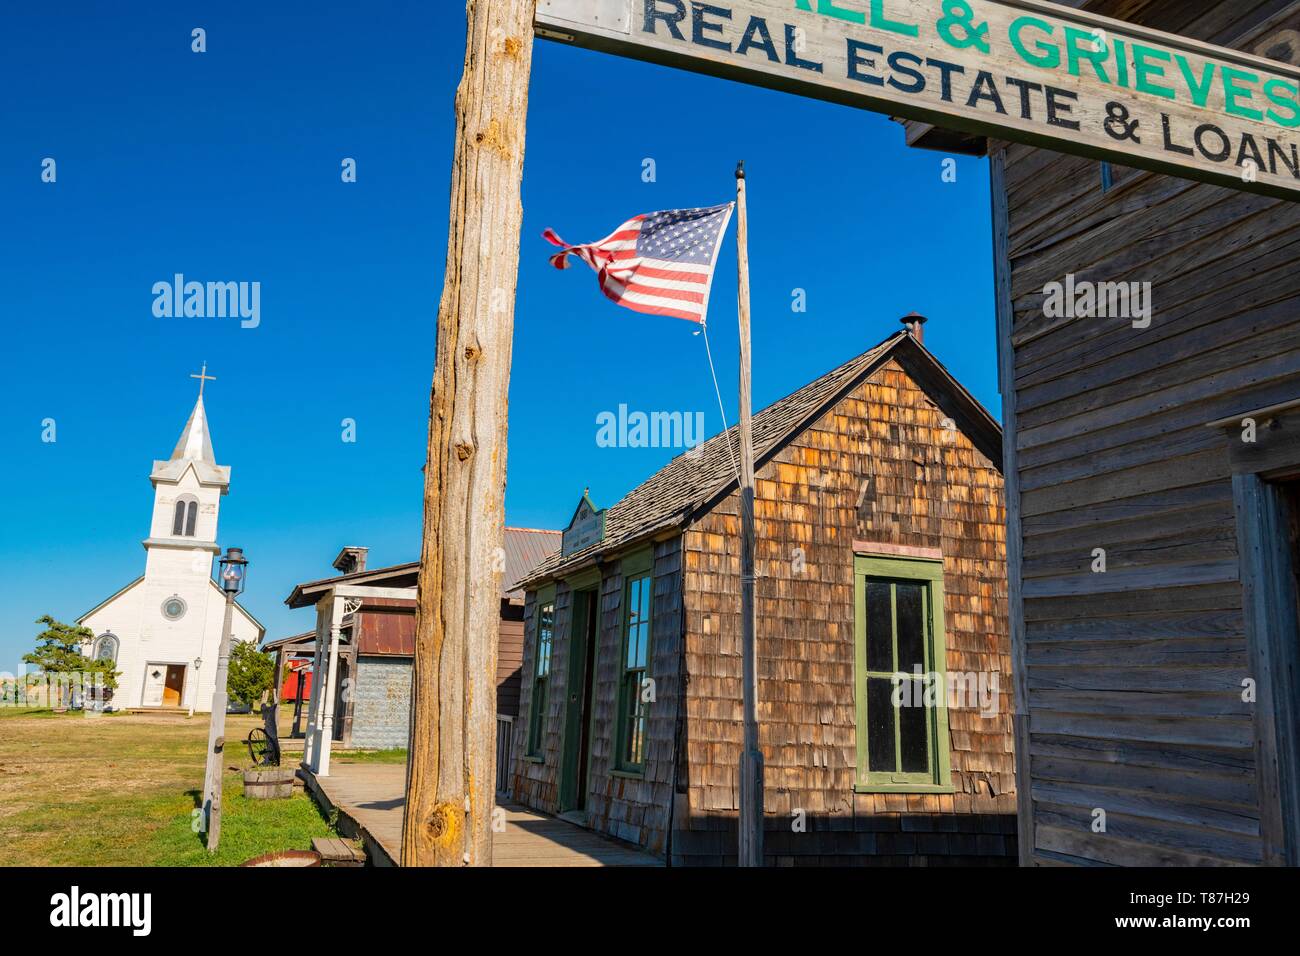 United States, South Dakota, The 1880 Town consists mainly of old buildings that were found in the area, and over the last several decades, it has been expanded with many additional authentic old buildings, artifacts and memorabilia, Dances with Wolves with Kevin Costner was partly shot there Stock Photo